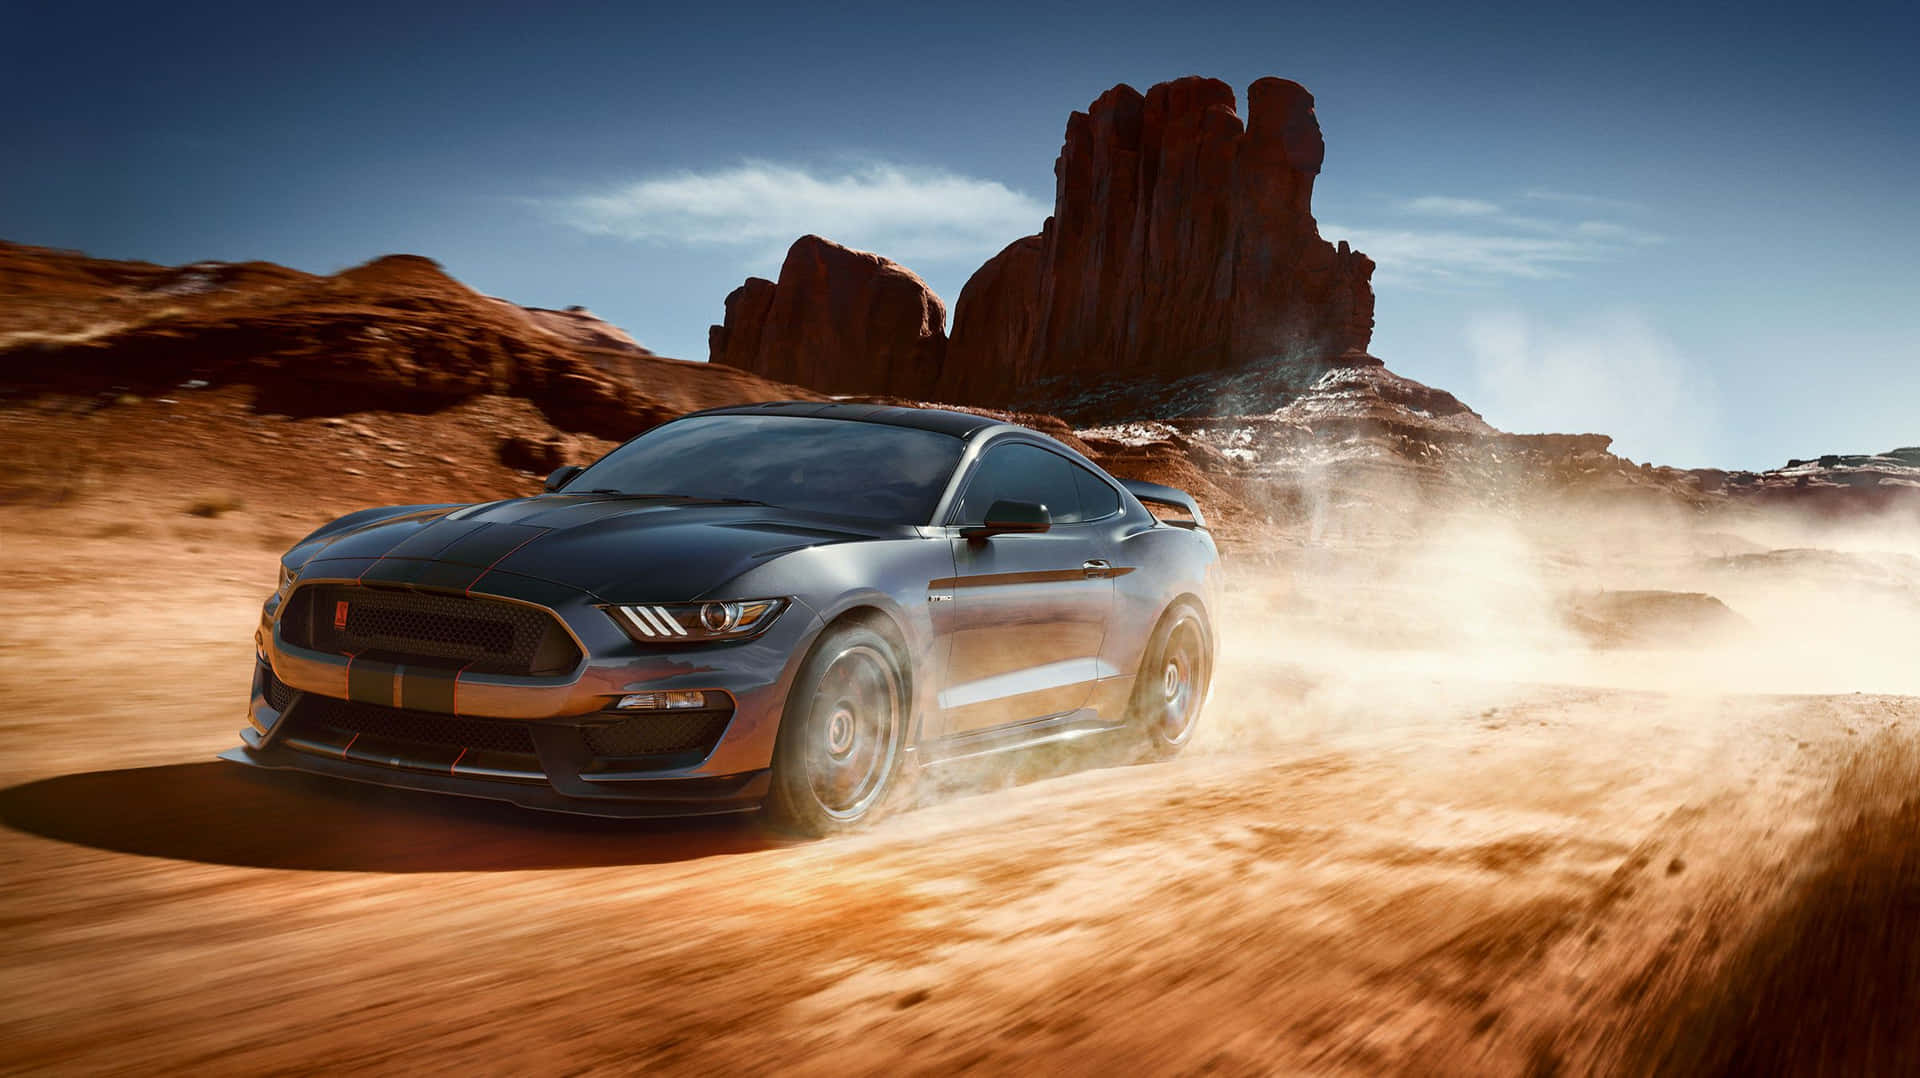 Ford Mustang Shelby GT350 Roaring its Power on the Road Wallpaper